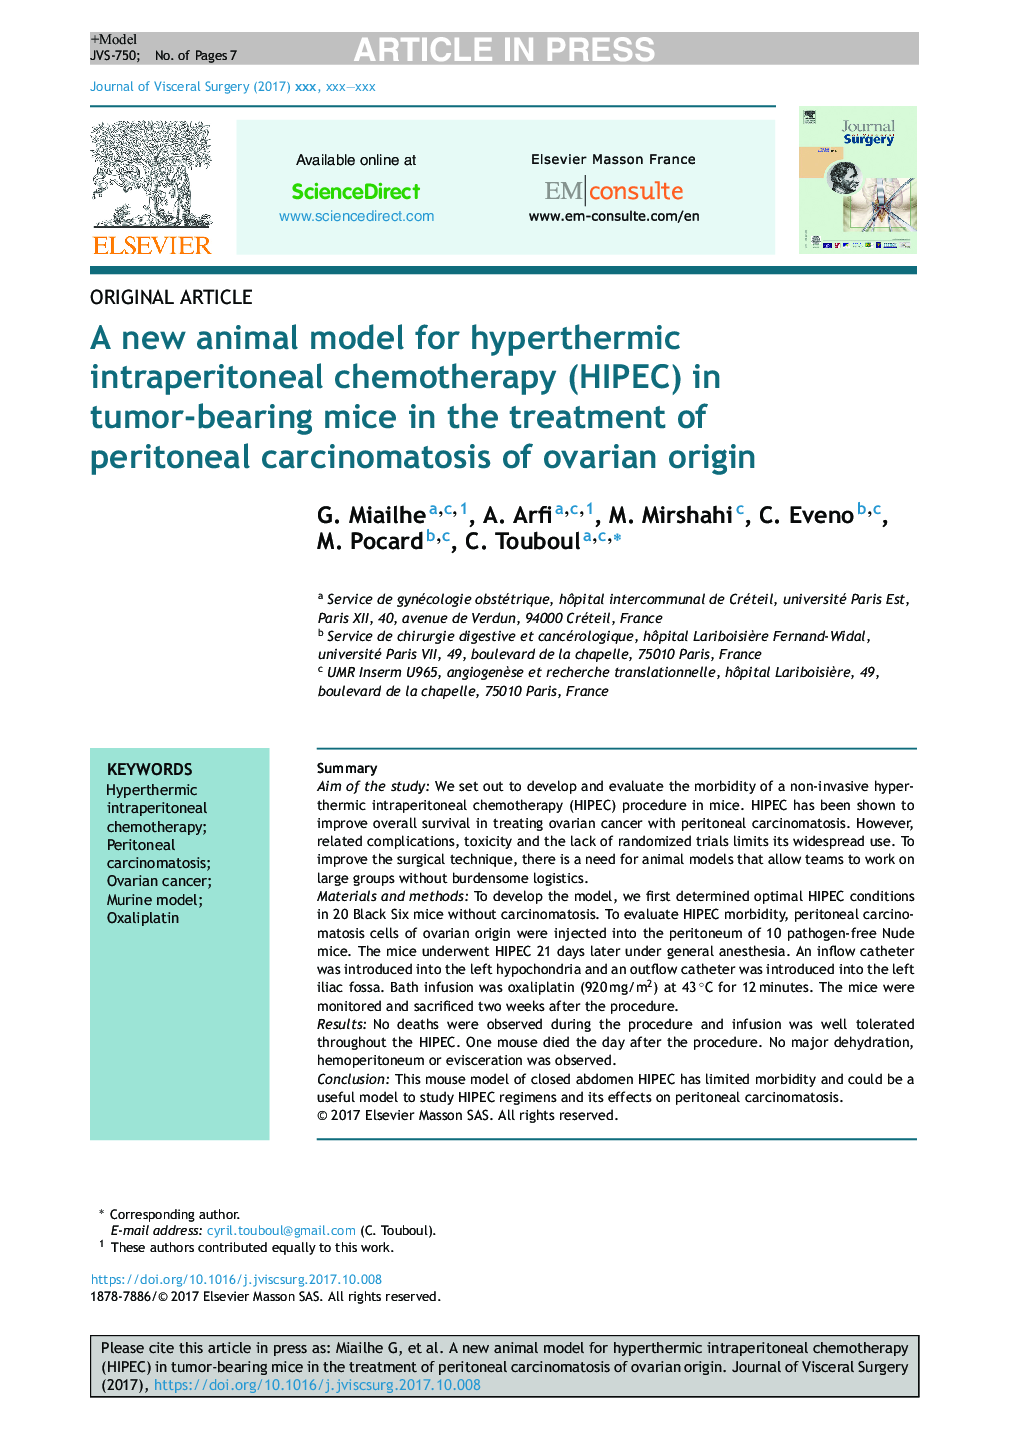 A new animal model for hyperthermic intraperitoneal chemotherapy (HIPEC) in tumor-bearing mice in the treatment of peritoneal carcinomatosis of ovarian origin